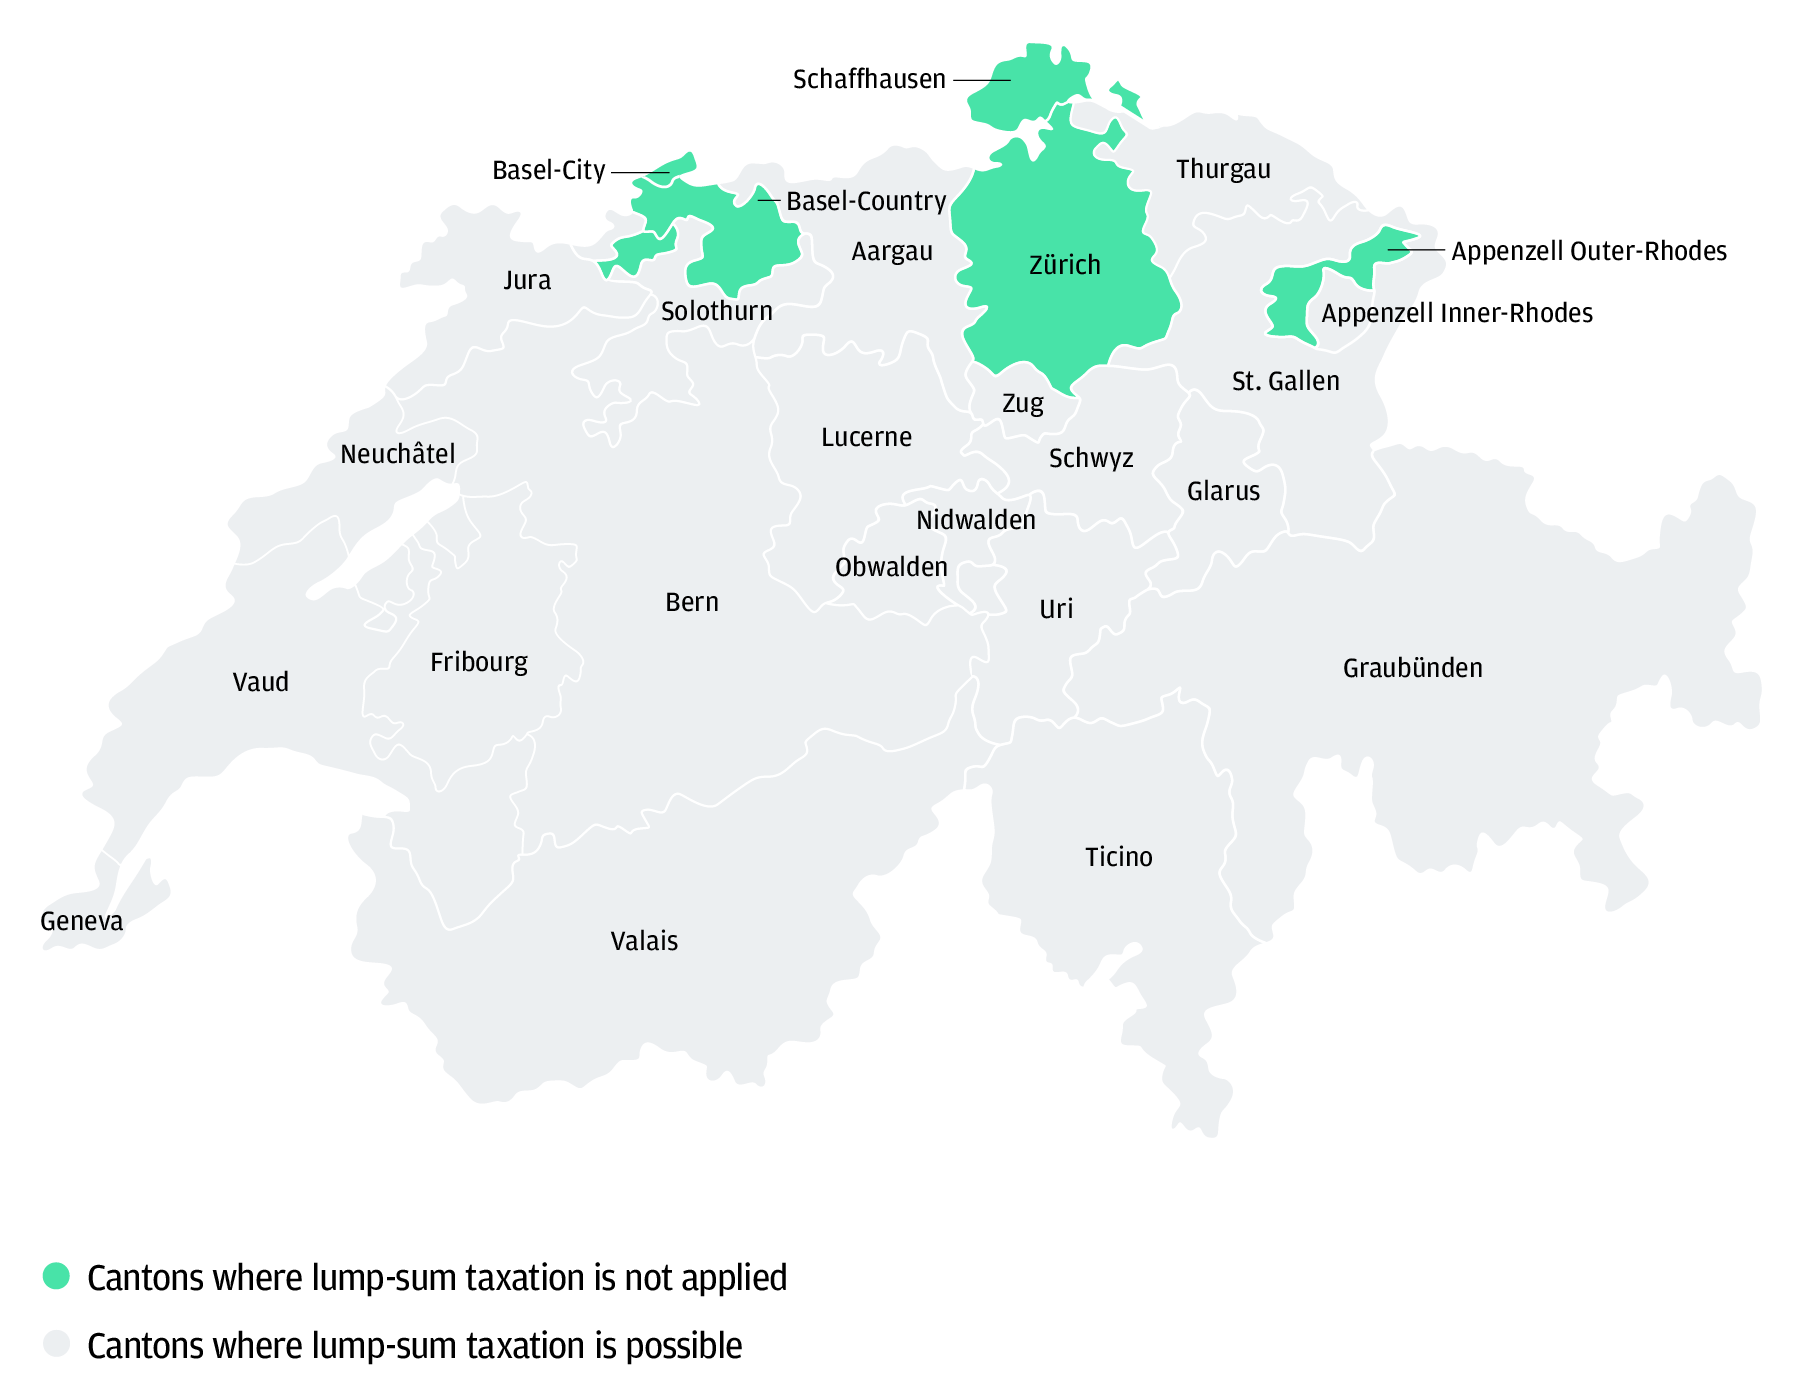 Image 5: A map of lump-sum taxation in Switzerland